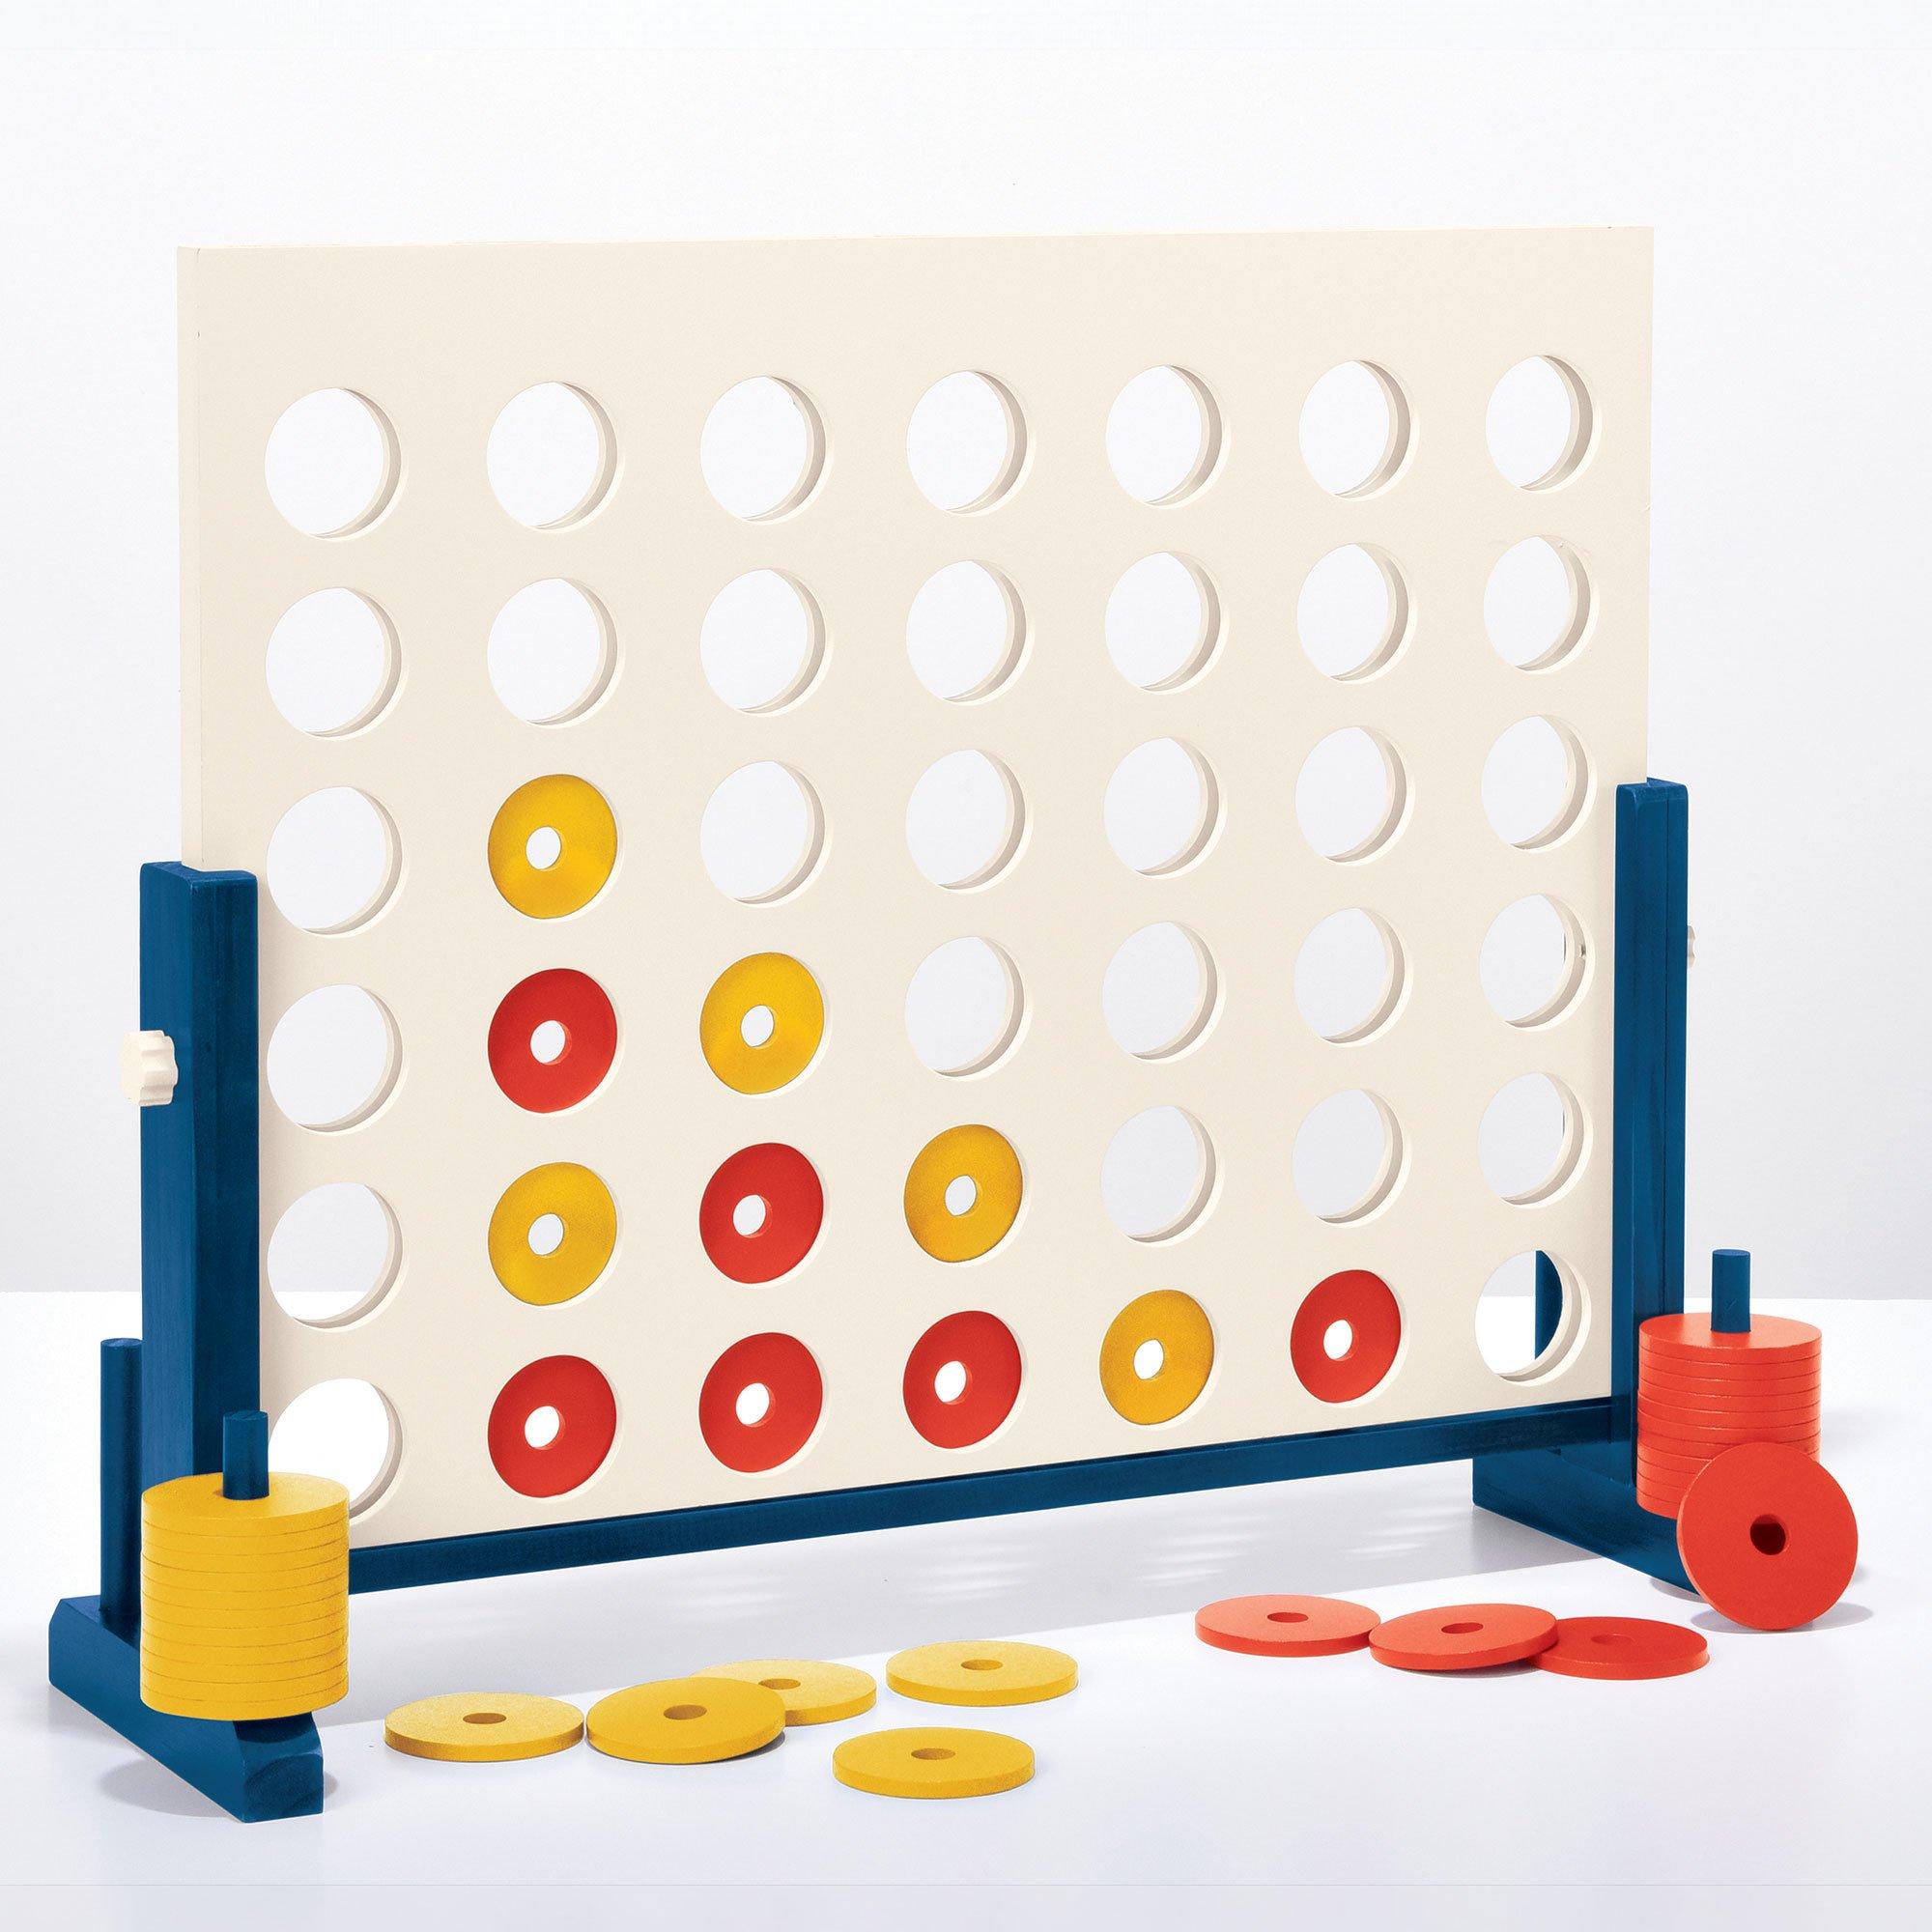 Oversized Four-in-a-Row Game, 23.25in x 17.75in, 43pc